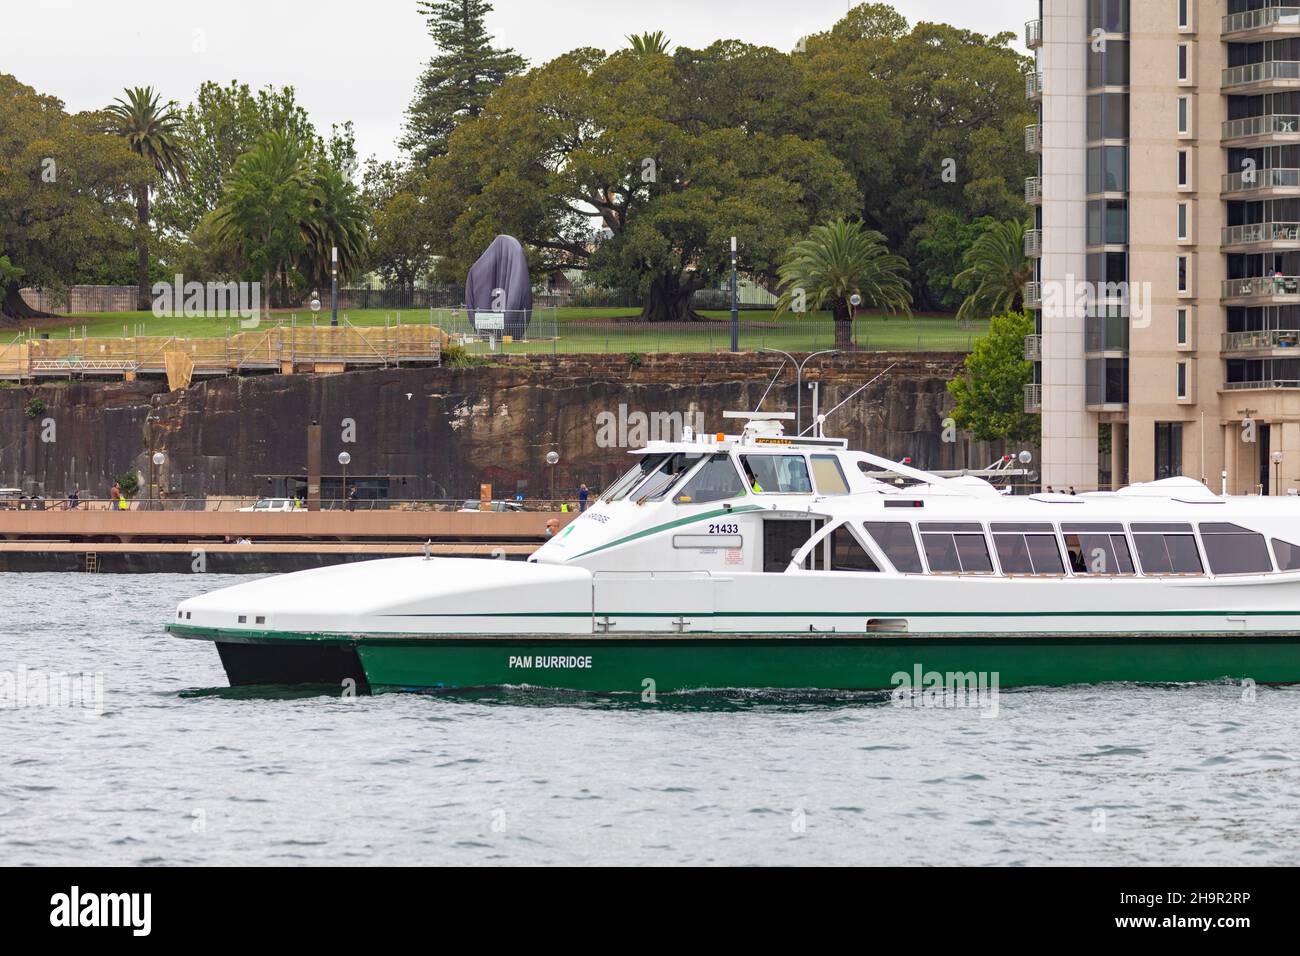 Sydney ferry MV Pam Burridge named after the female surfer is a harbourCat class ferry servicing the parramatta river in Sydney,NSW,Australia Stock Photo